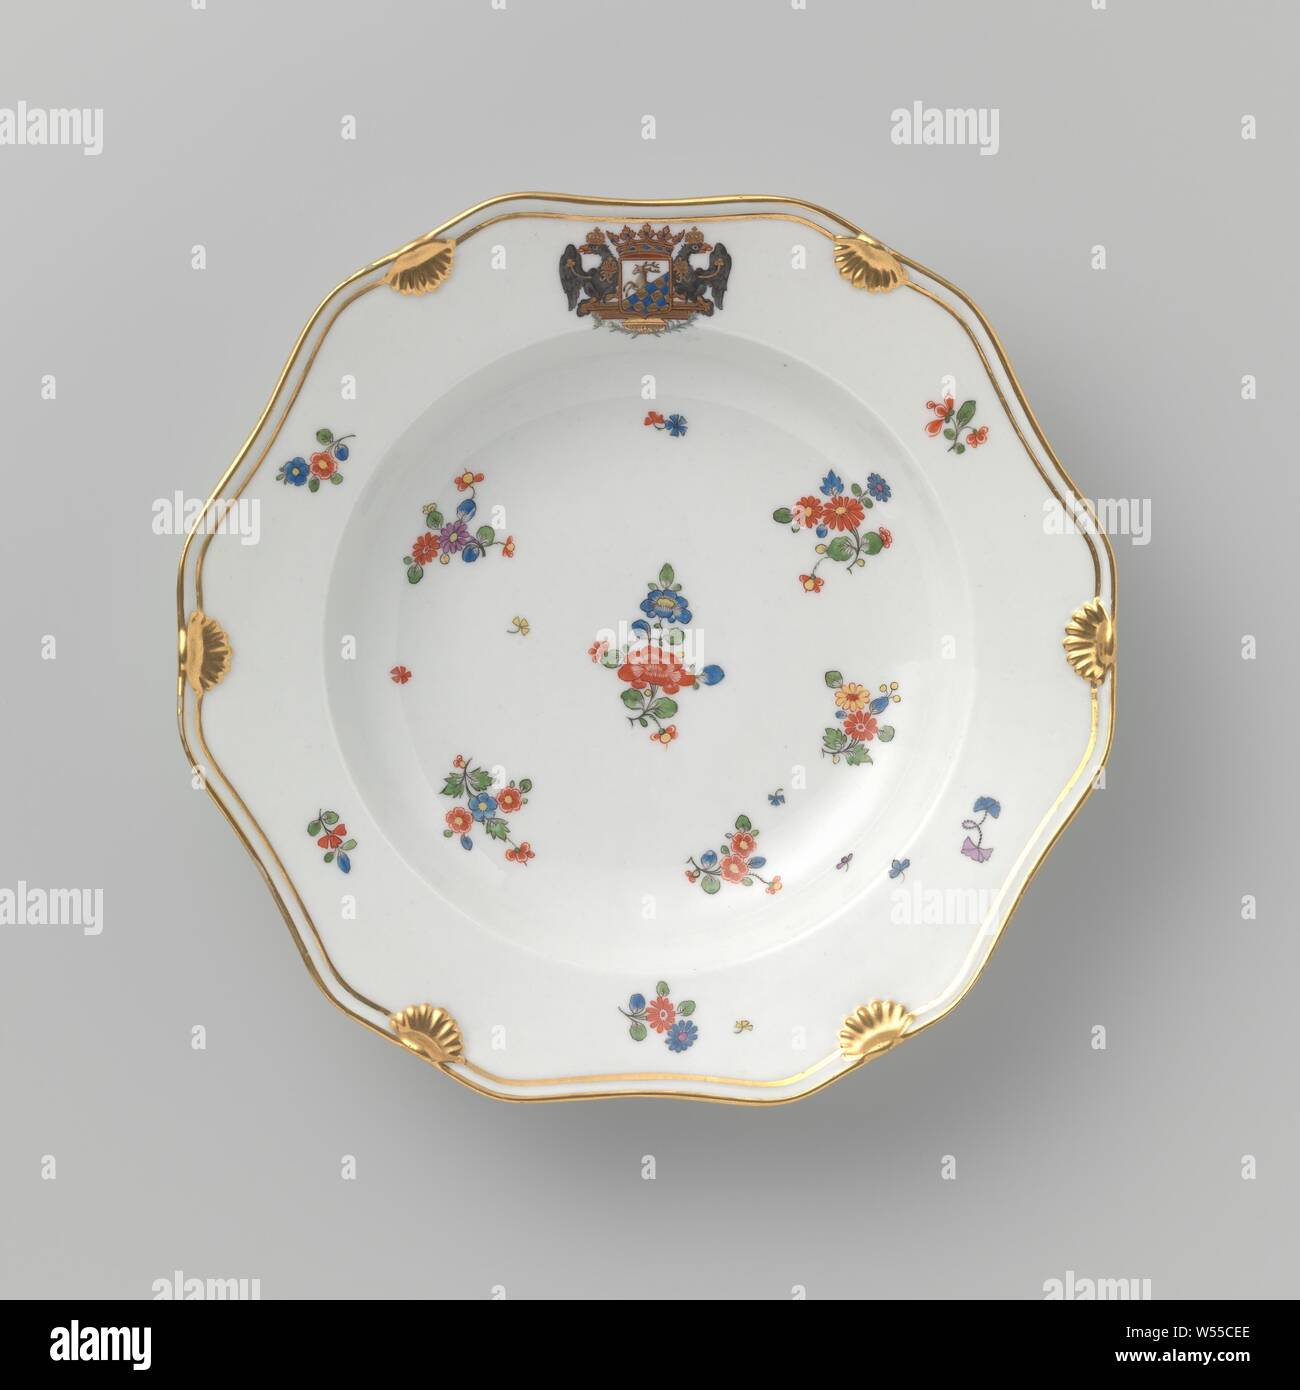 Plate with the coat of ams or Count Heinrich of Podewils and flower sprays, 12-sided porcelain plate painted on the glaze in blue, red, pink, green, yellow, black and gold. On the shelf, the wall and the border flower branches and scatter flowers in the style of the Japanese Kakiemon porcelain. The crowned weapon of Count Heinrich von Podewils (1695-1760) on the rim. Along the edge a double golden line interrupted by six shell motifs. The rear with two scatter flowers. Marked on the bottom with the scepter and number 23., Königliche Porzellan Manufaktur, Berlin, c. 1763 - c. 1800, porcelain Stock Photo